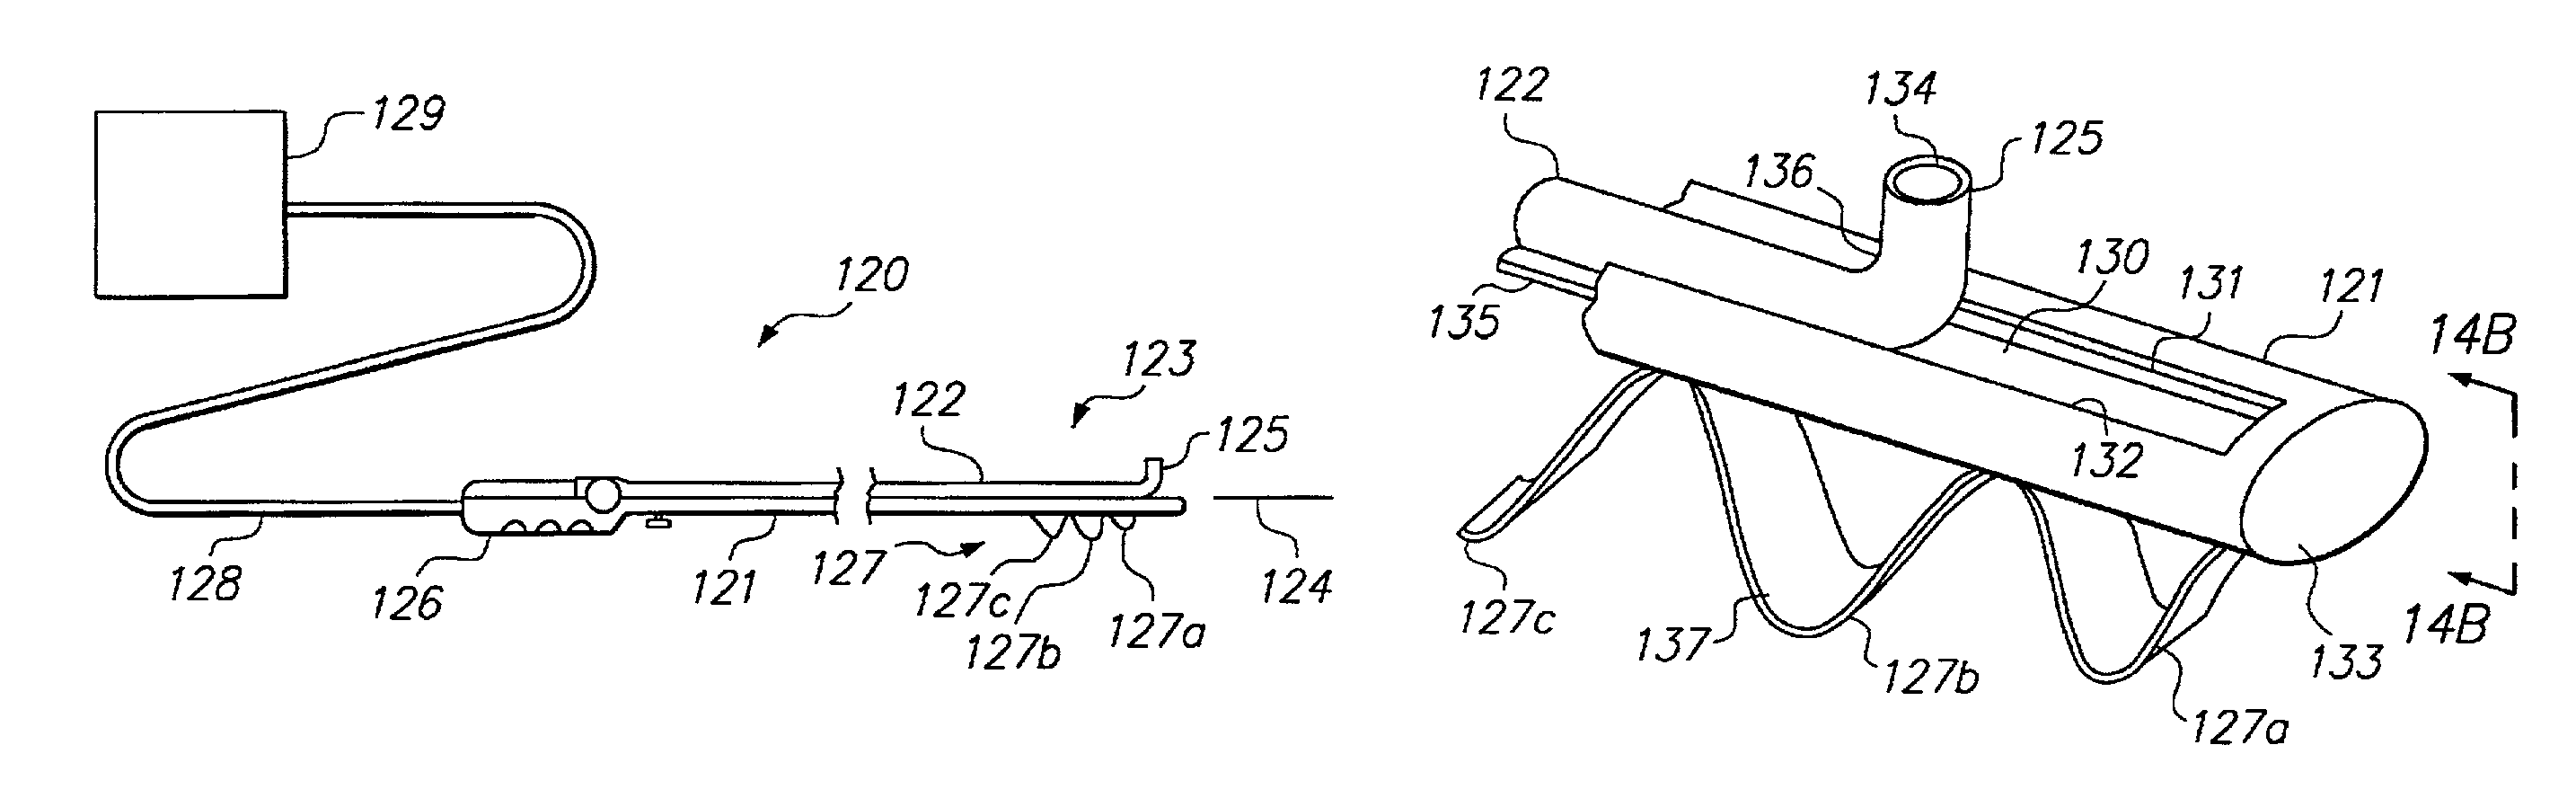 Apparatus having stabilization members for percutaneously performing surgery and methods of use